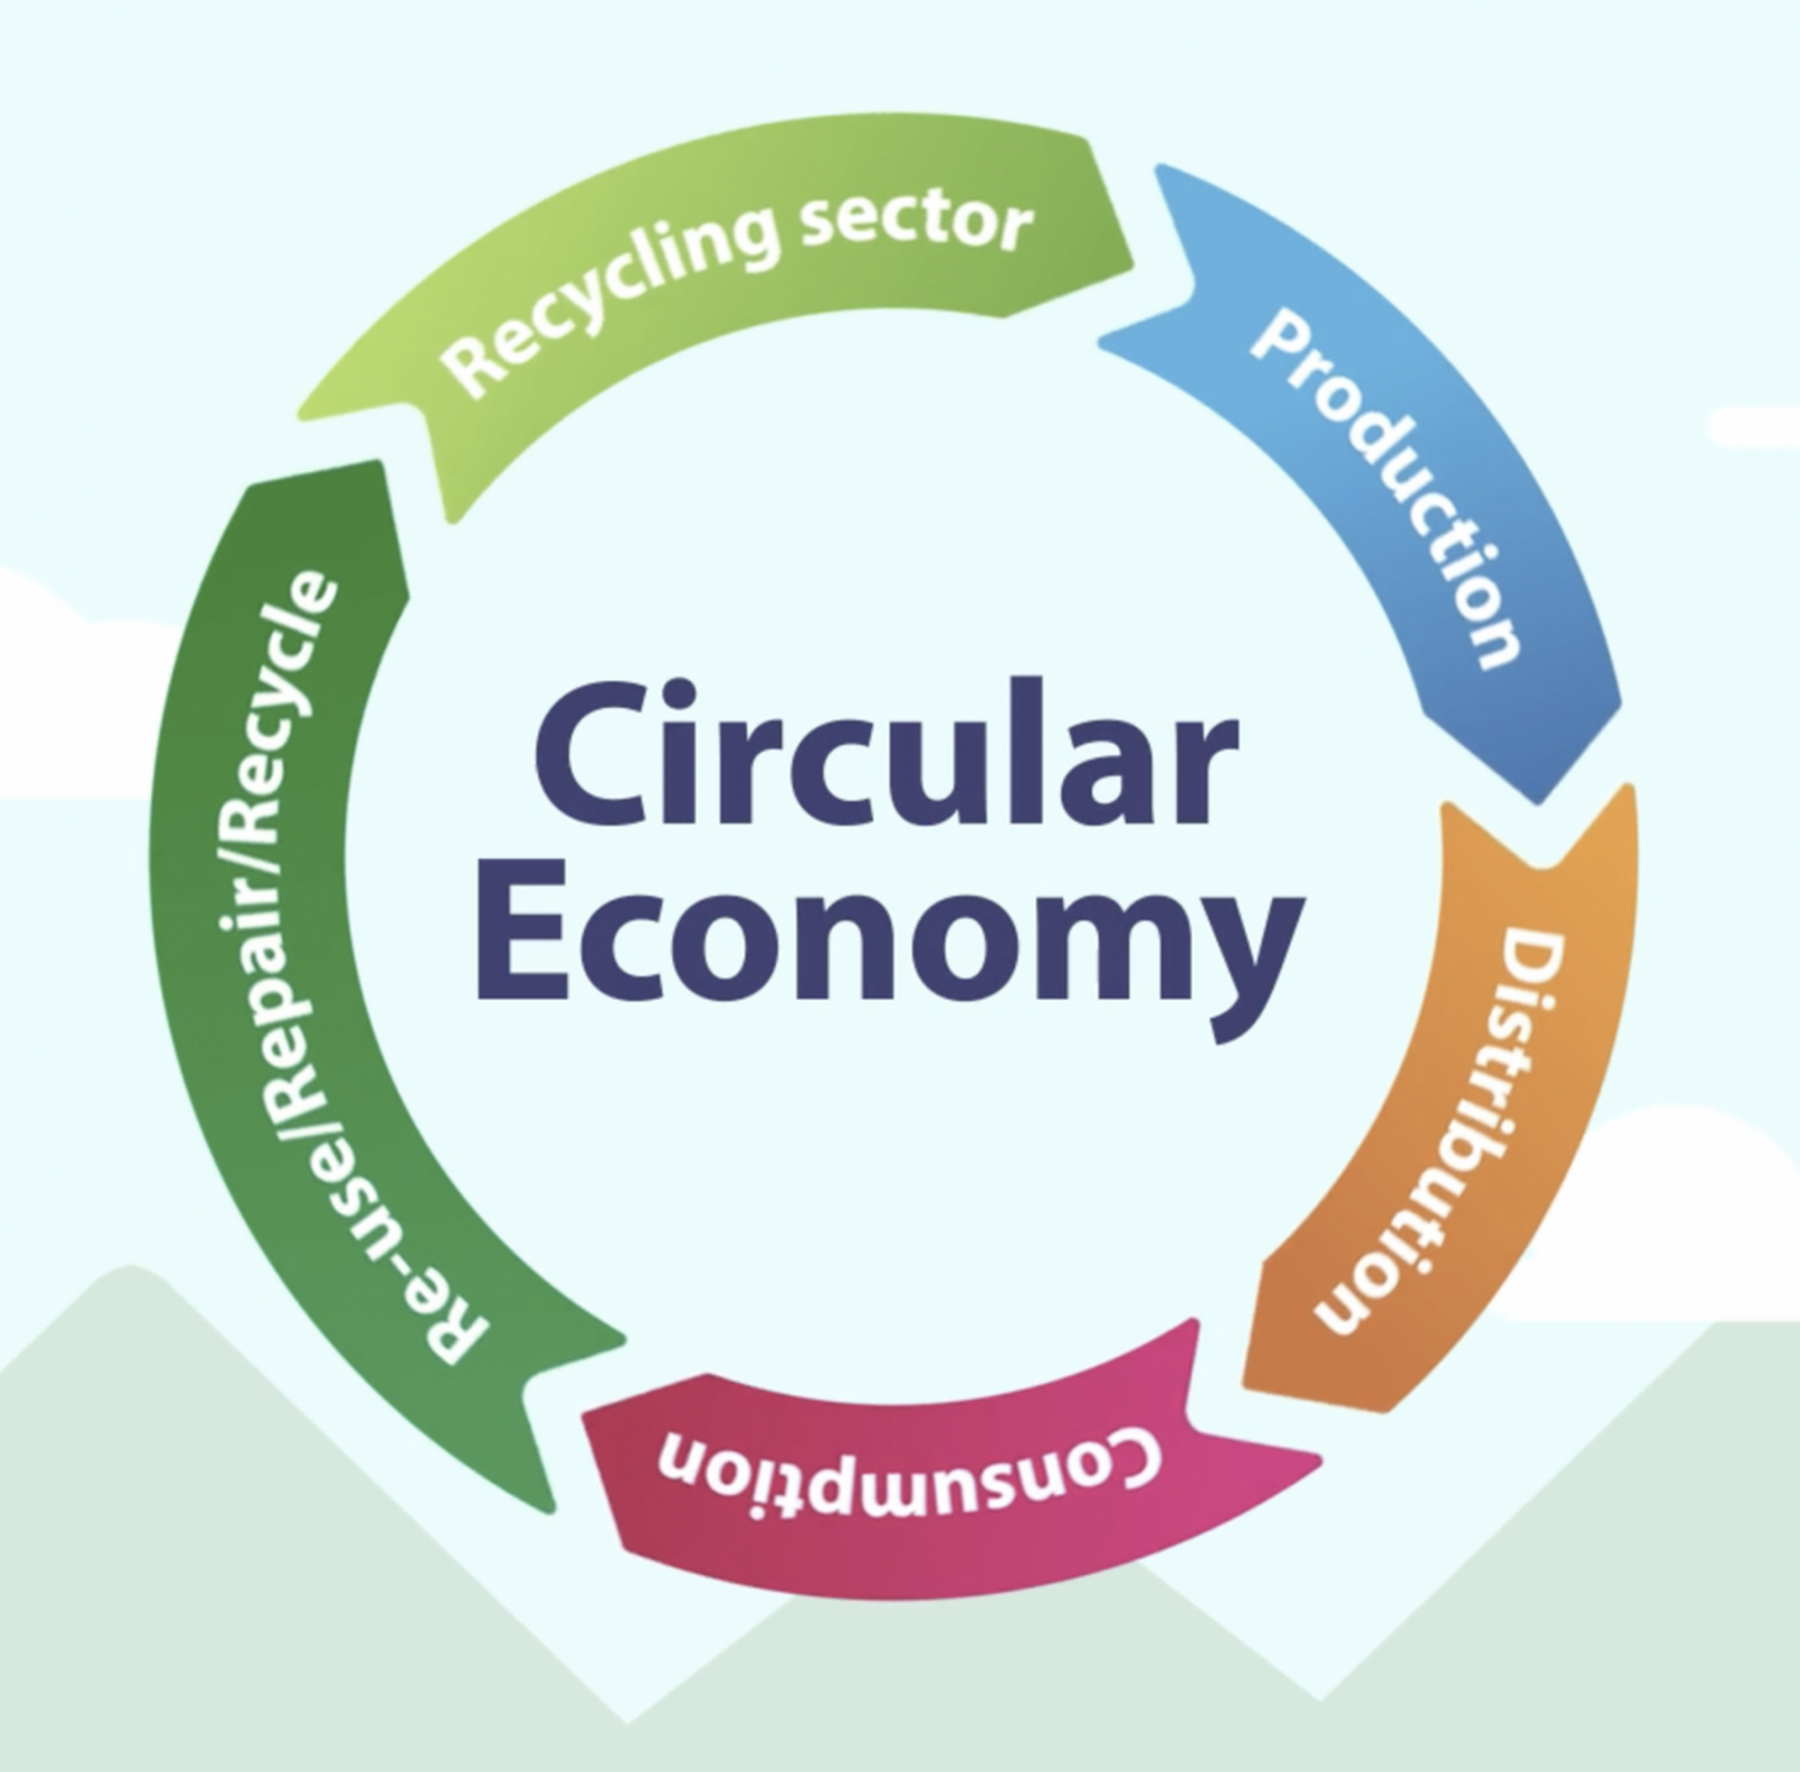 Circular economy, valorisation or re-use of industrial waste and side-products into secondary raw materials or alternative fuel